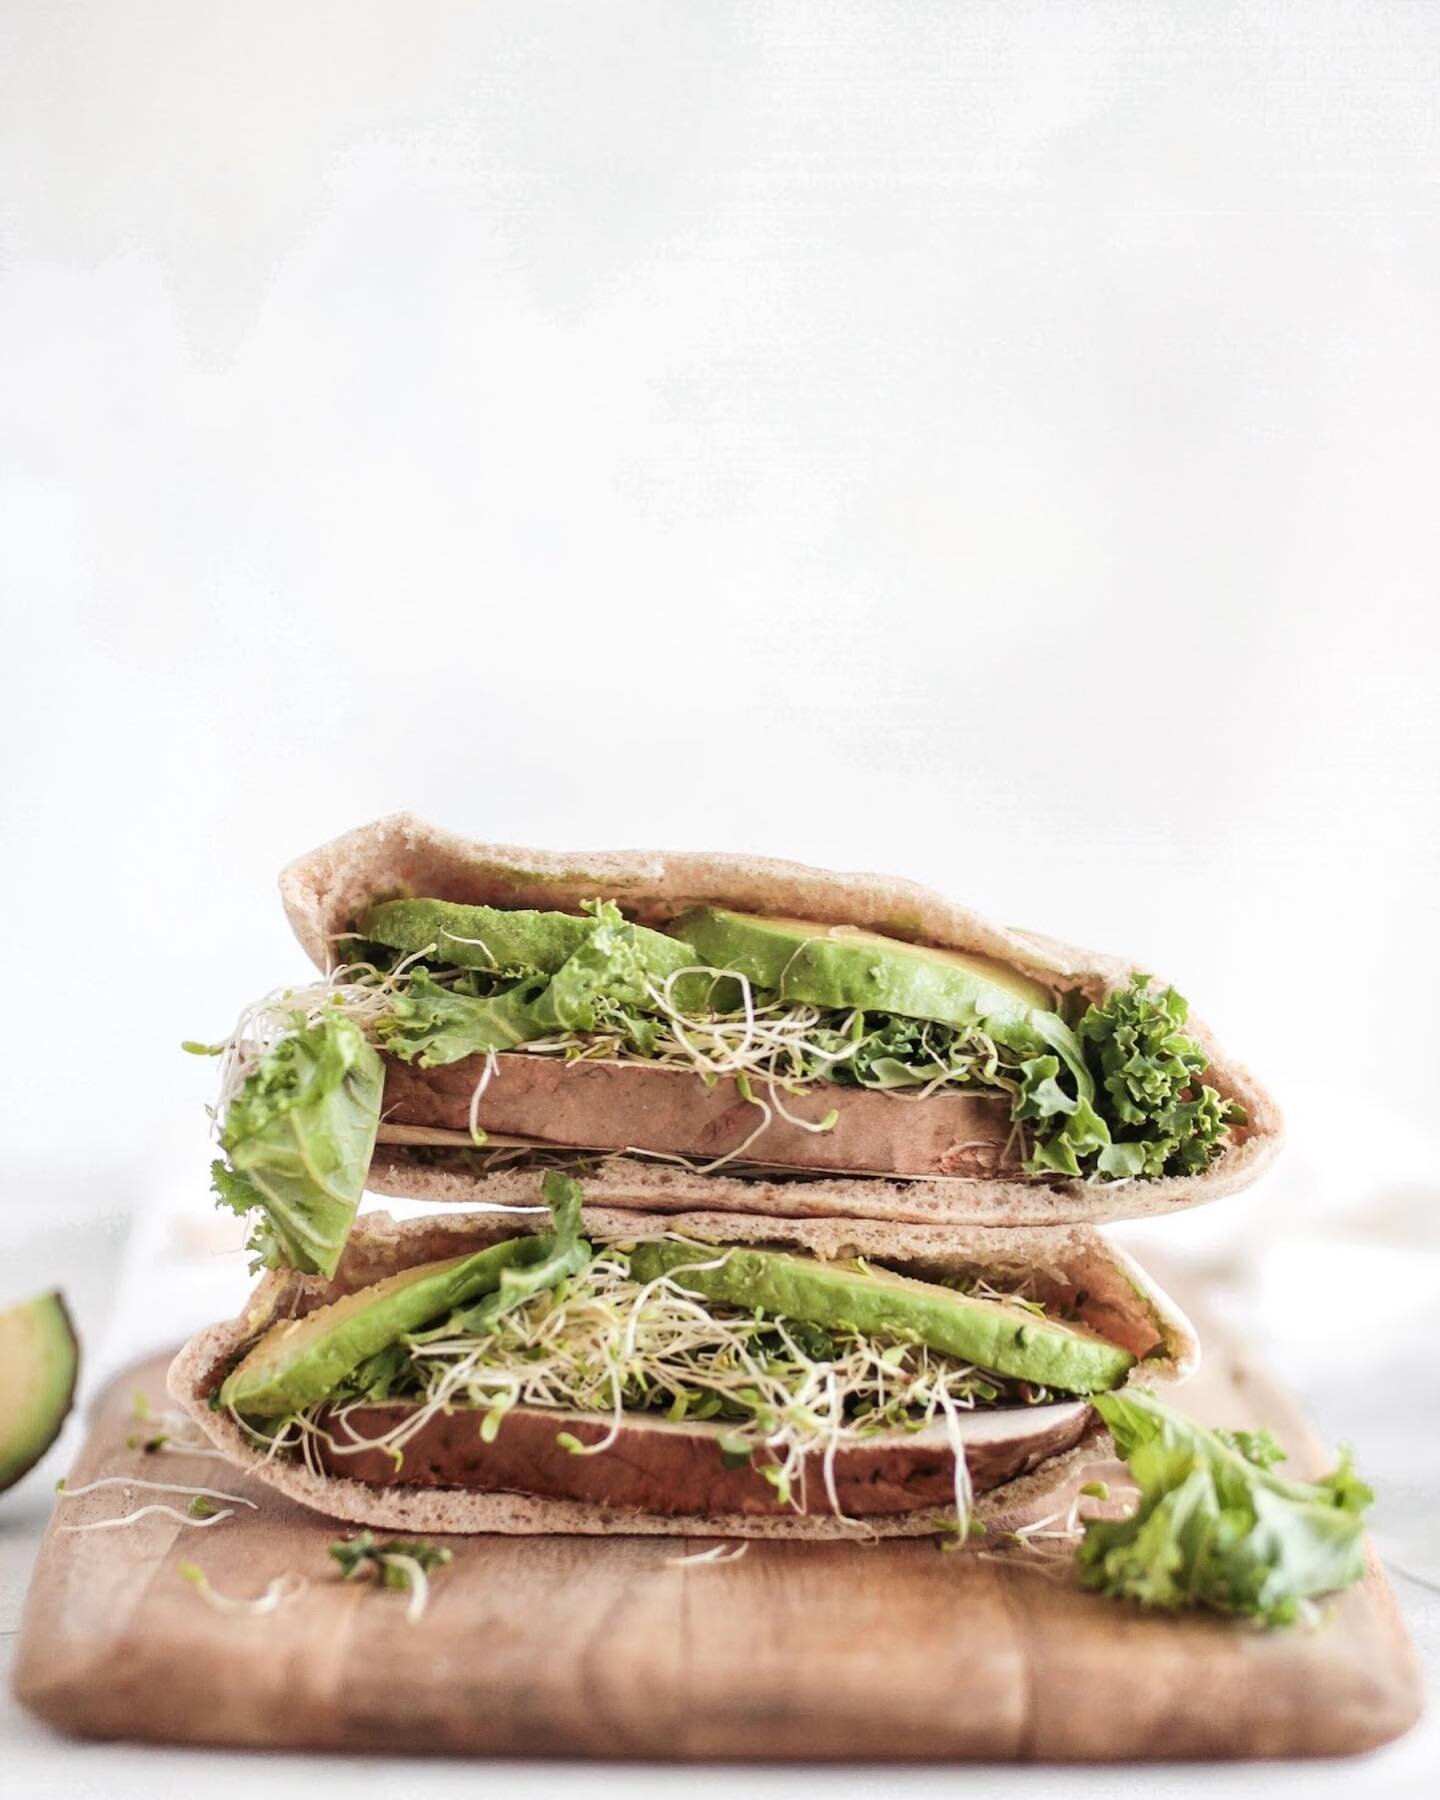 For a quick lunch, stuff a lightly toasted @foodforlifebaking sprouted grain pita with greens, sprouts, avocado, portobello mushroom and a thick, creamy layer of hummus. Add a generous squeeze of fresh lemon juice, sea salt and black pepper to taste.